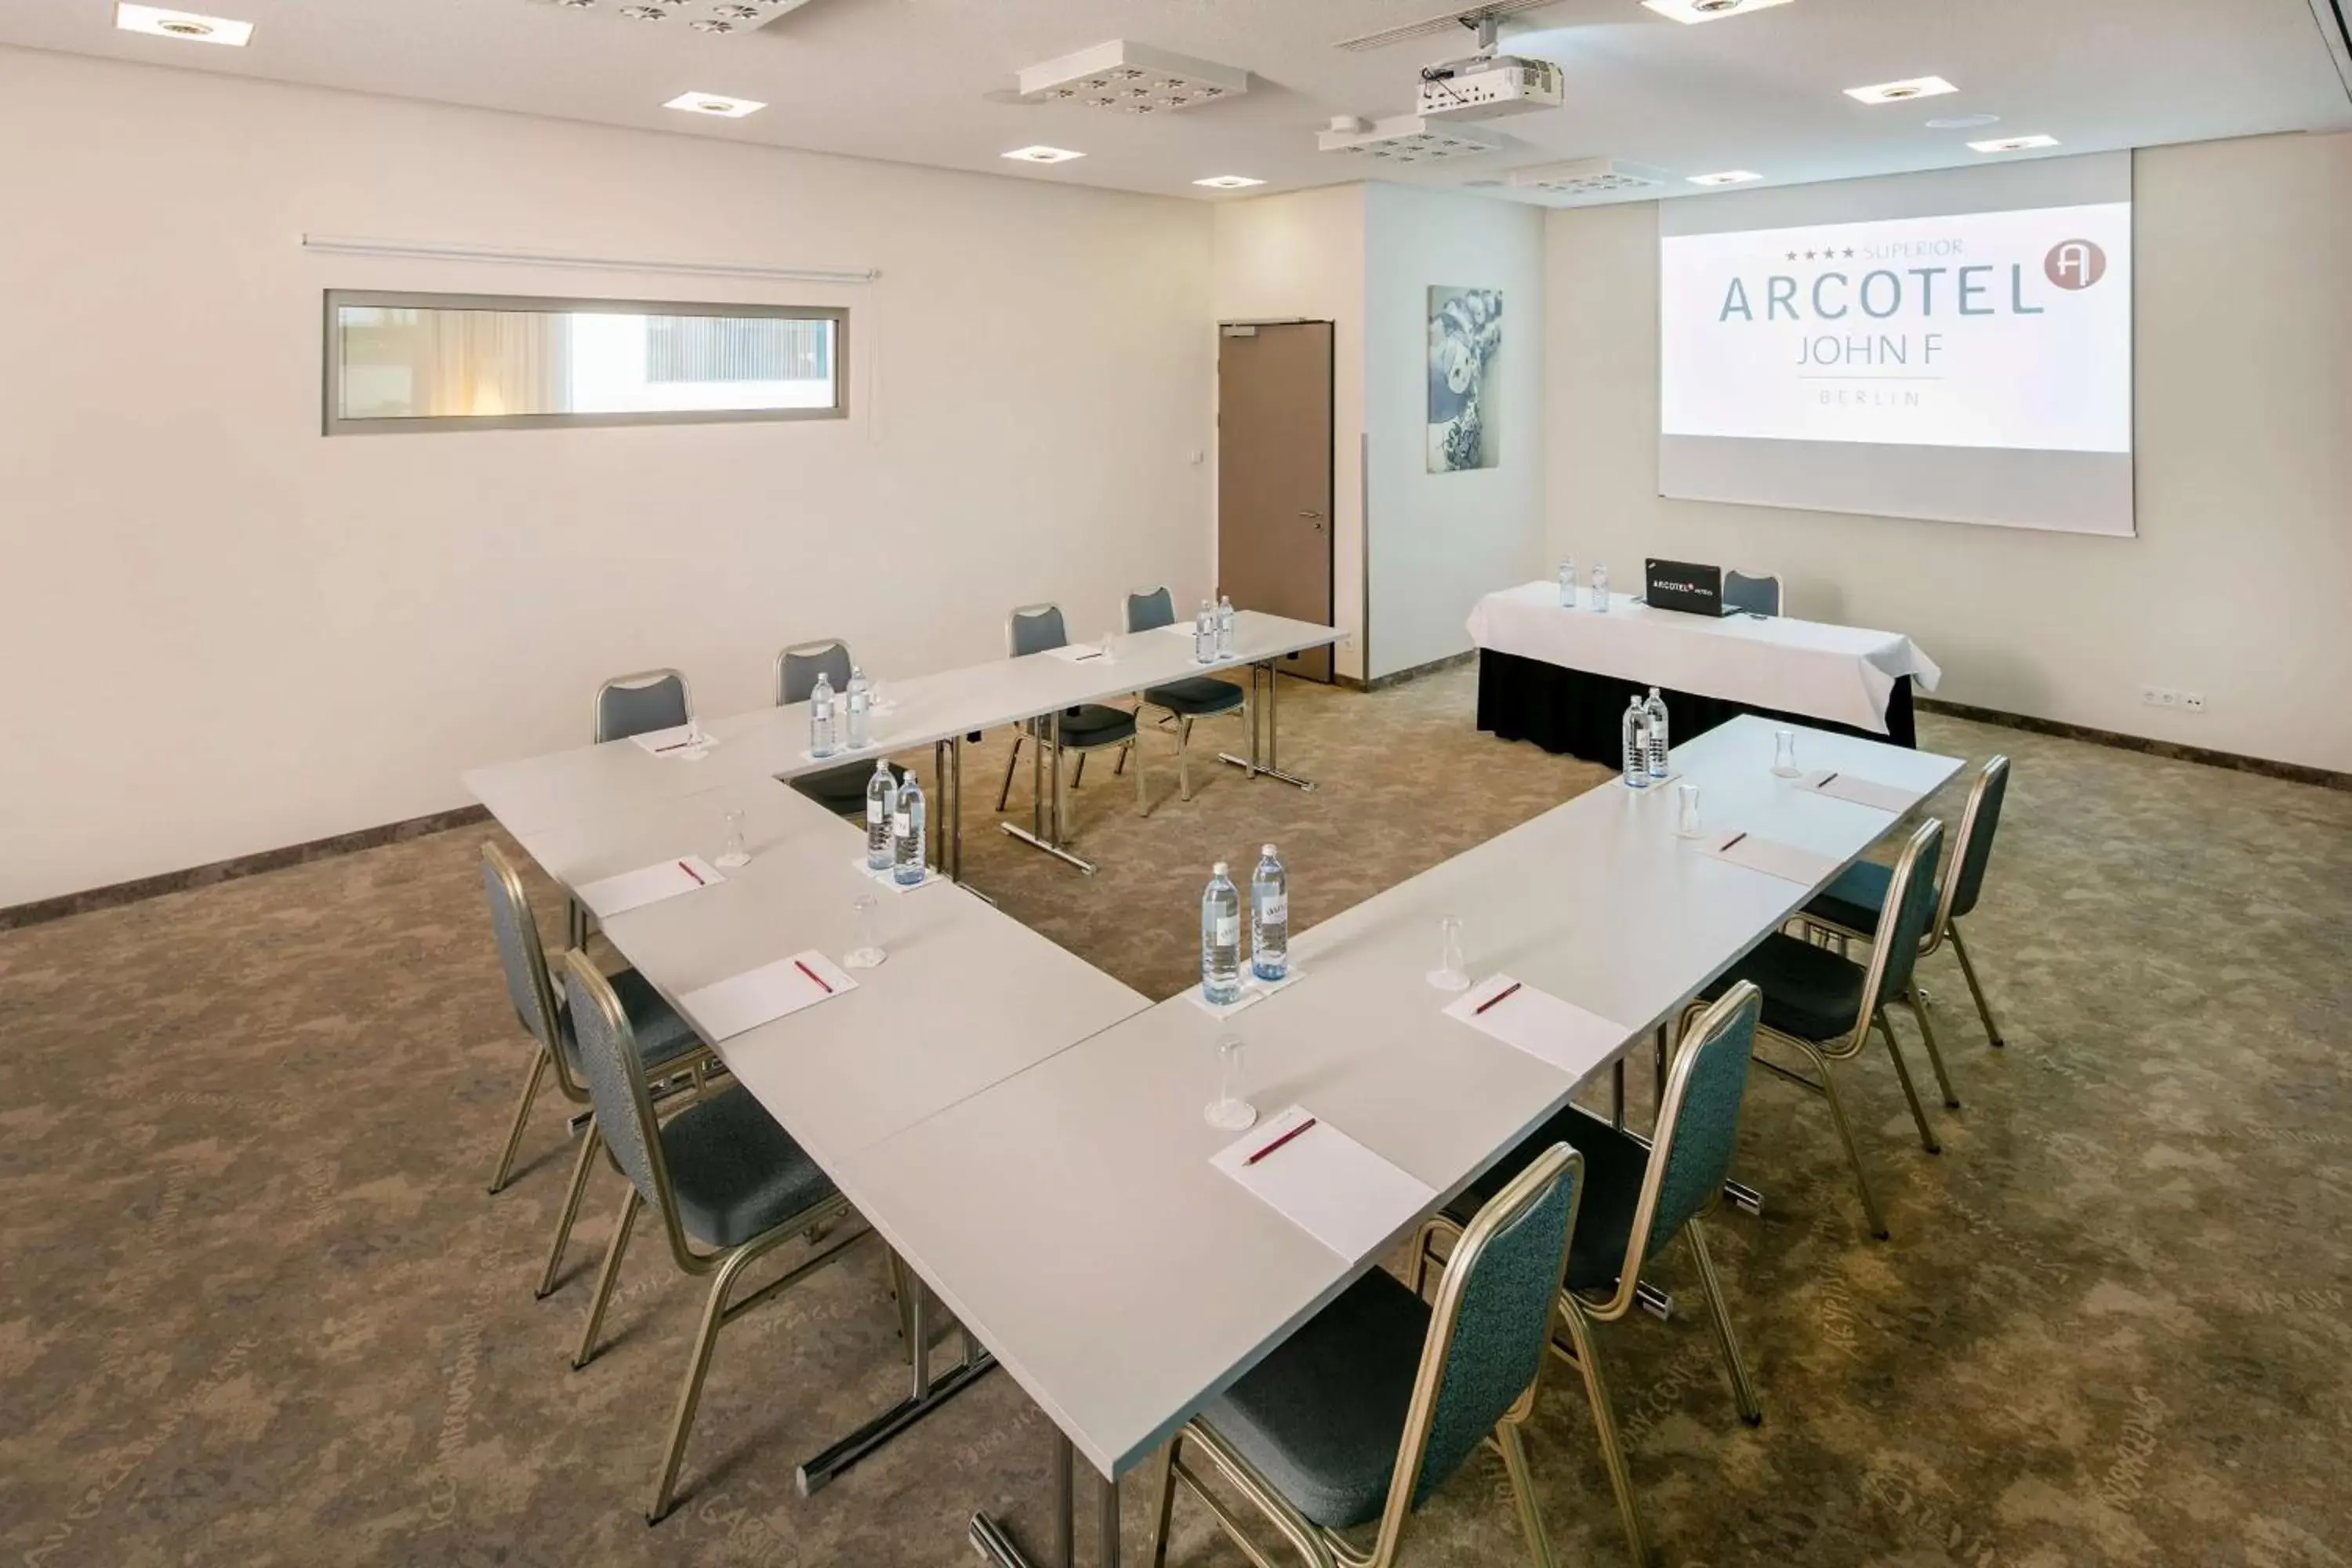 Meeting/conference room in ARCOTEL John F Berlin